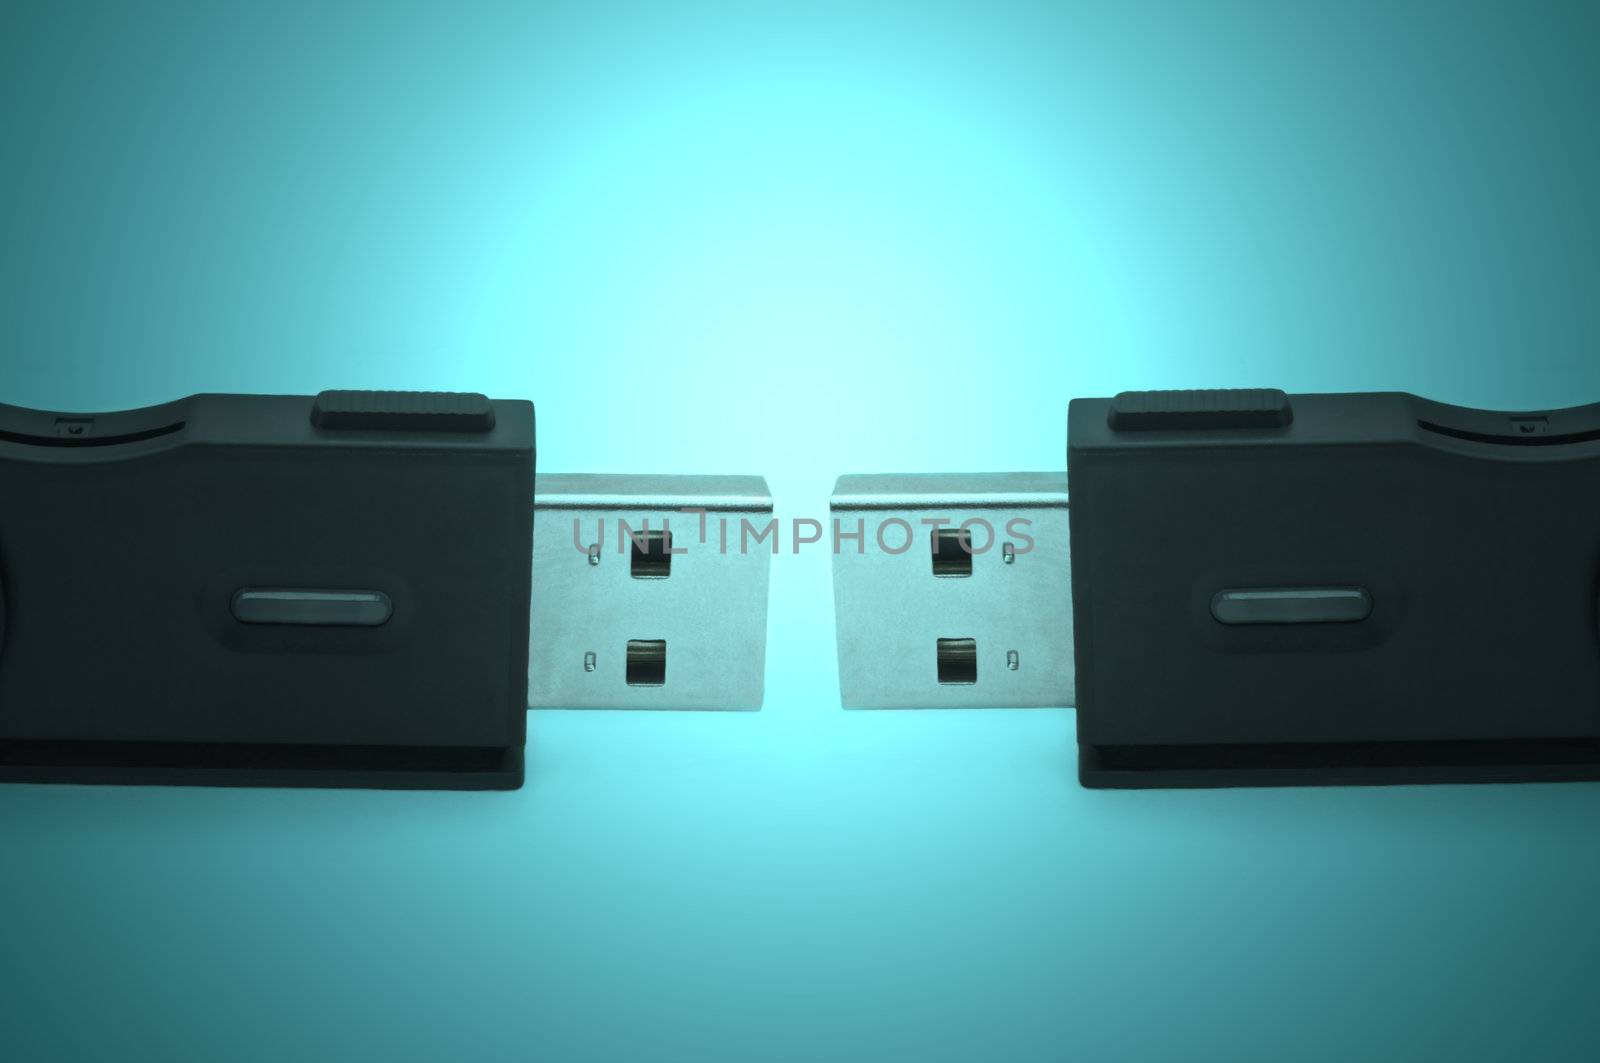 Close and low level capturing two black sd usb adaptors arranged over a blue light effect filter